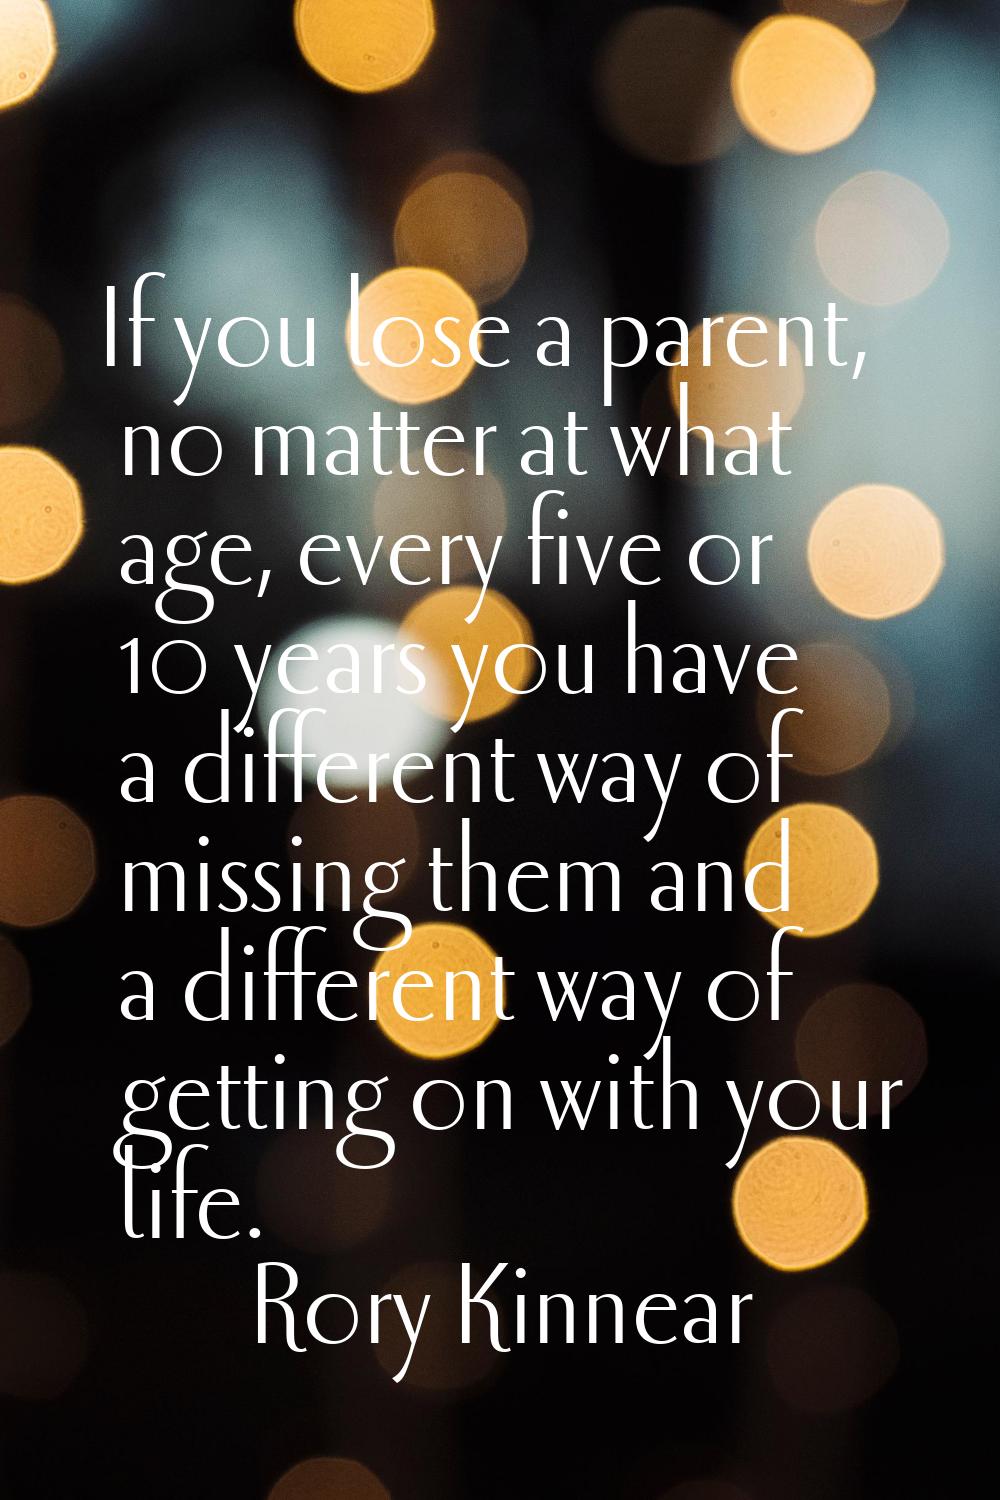 If you lose a parent, no matter at what age, every five or 10 years you have a different way of mis